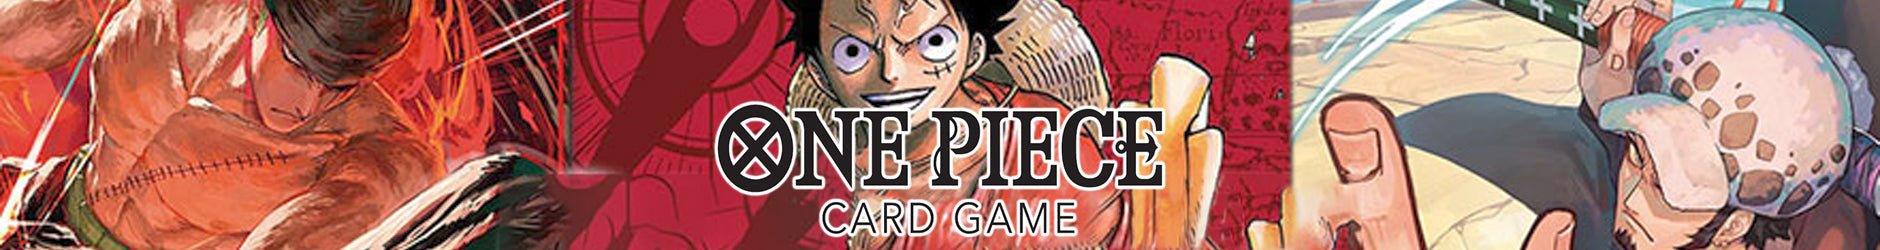 One Piece Coming Soon - Romulus Games